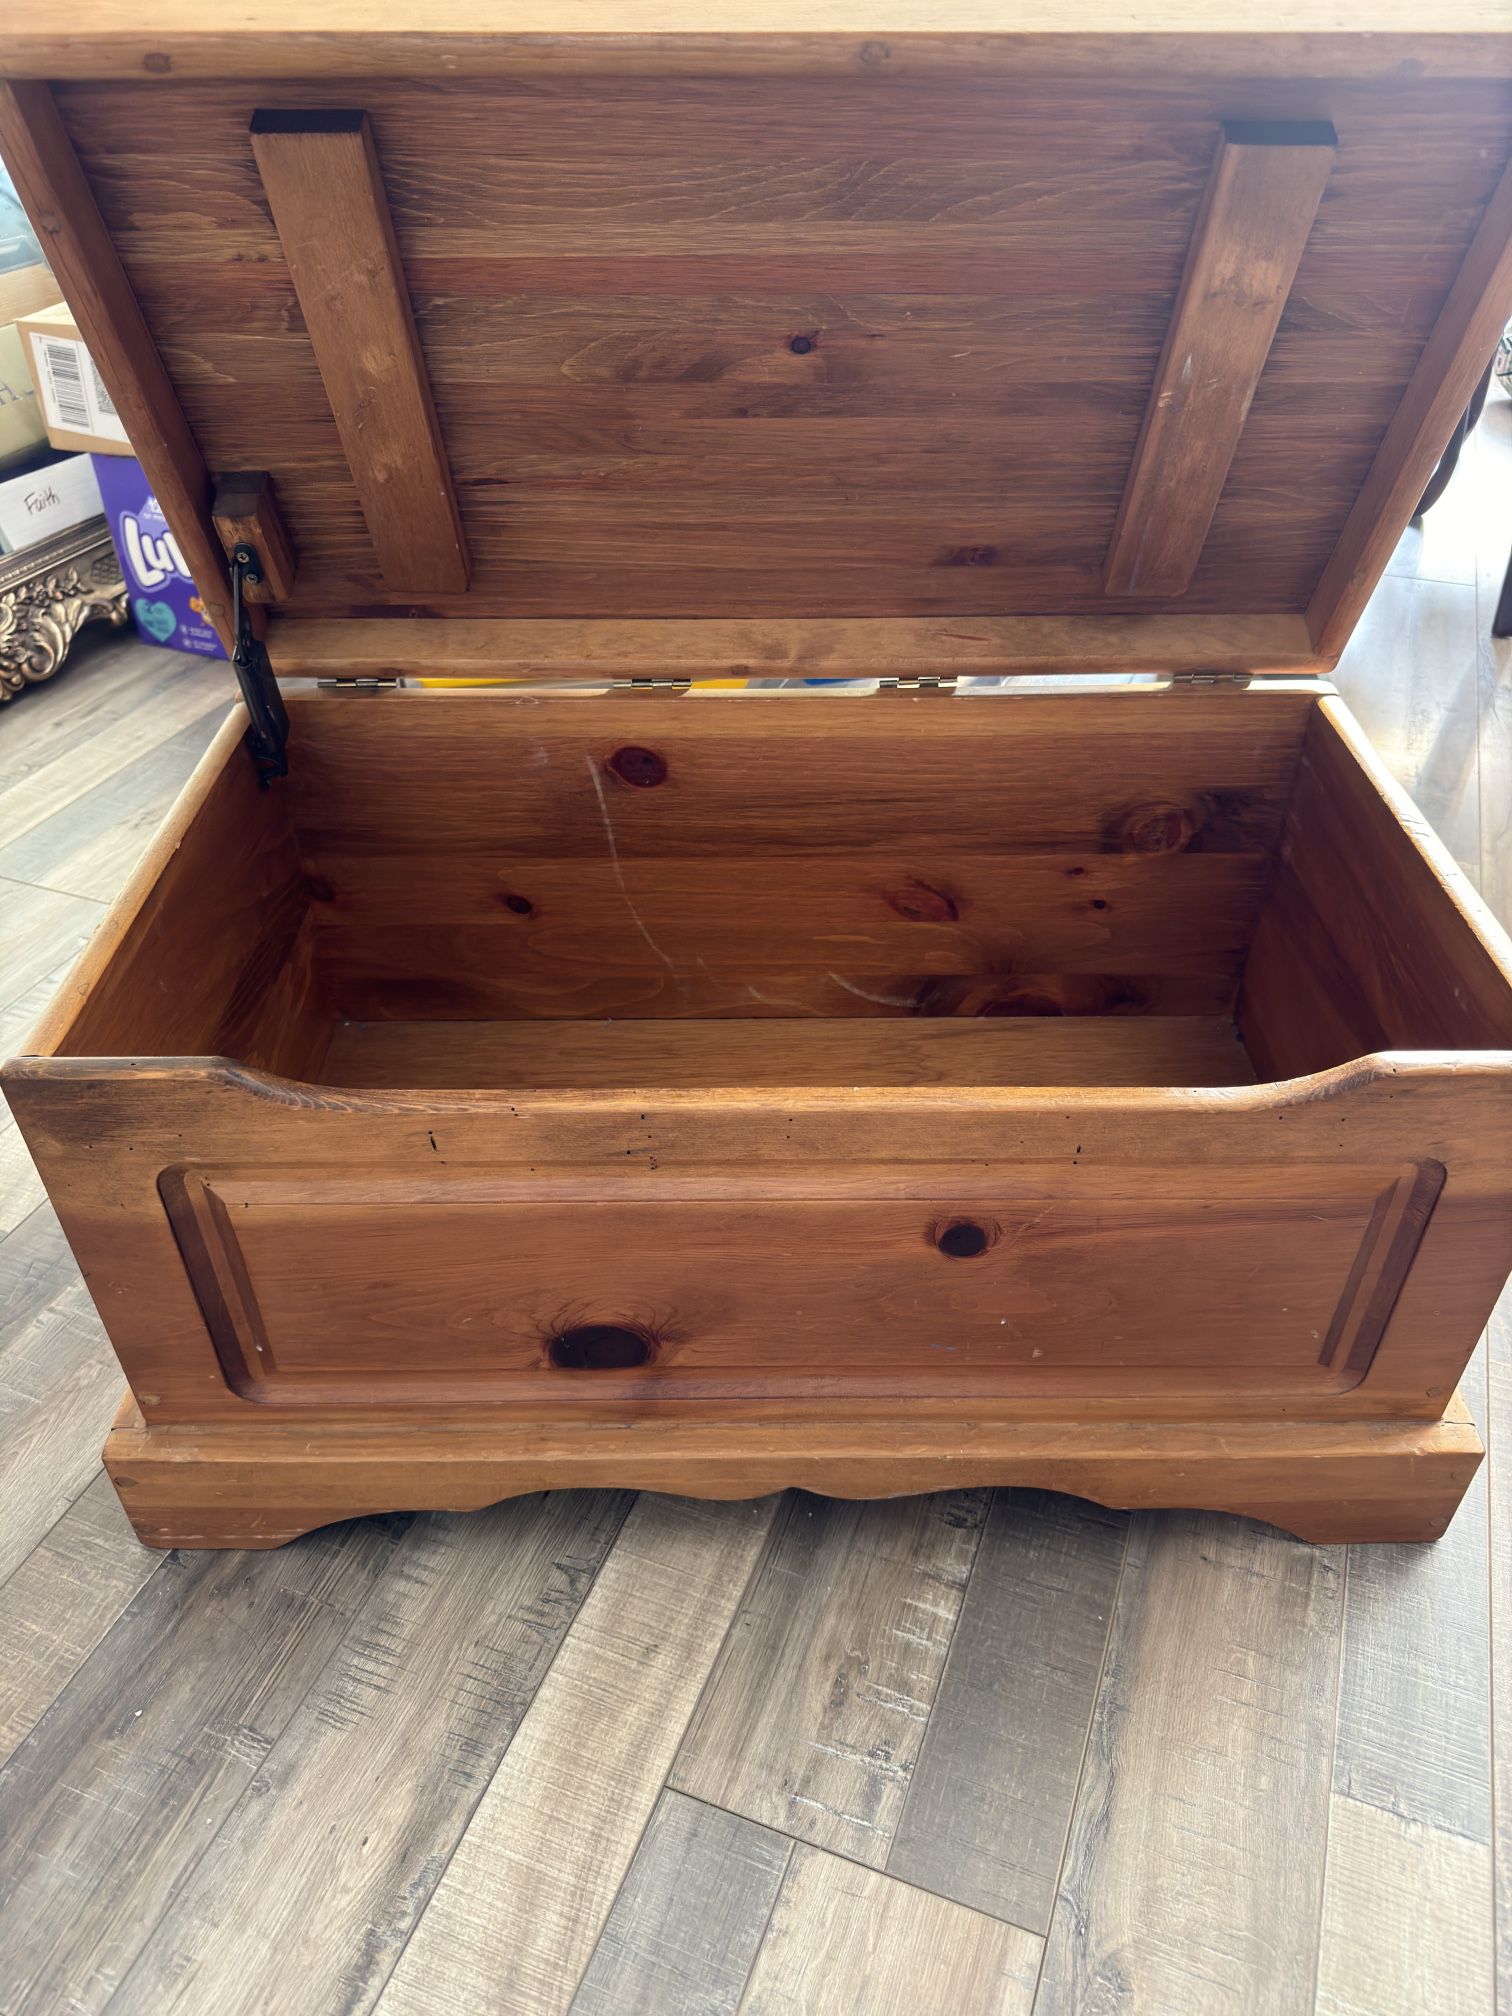 Wood Toy Chest